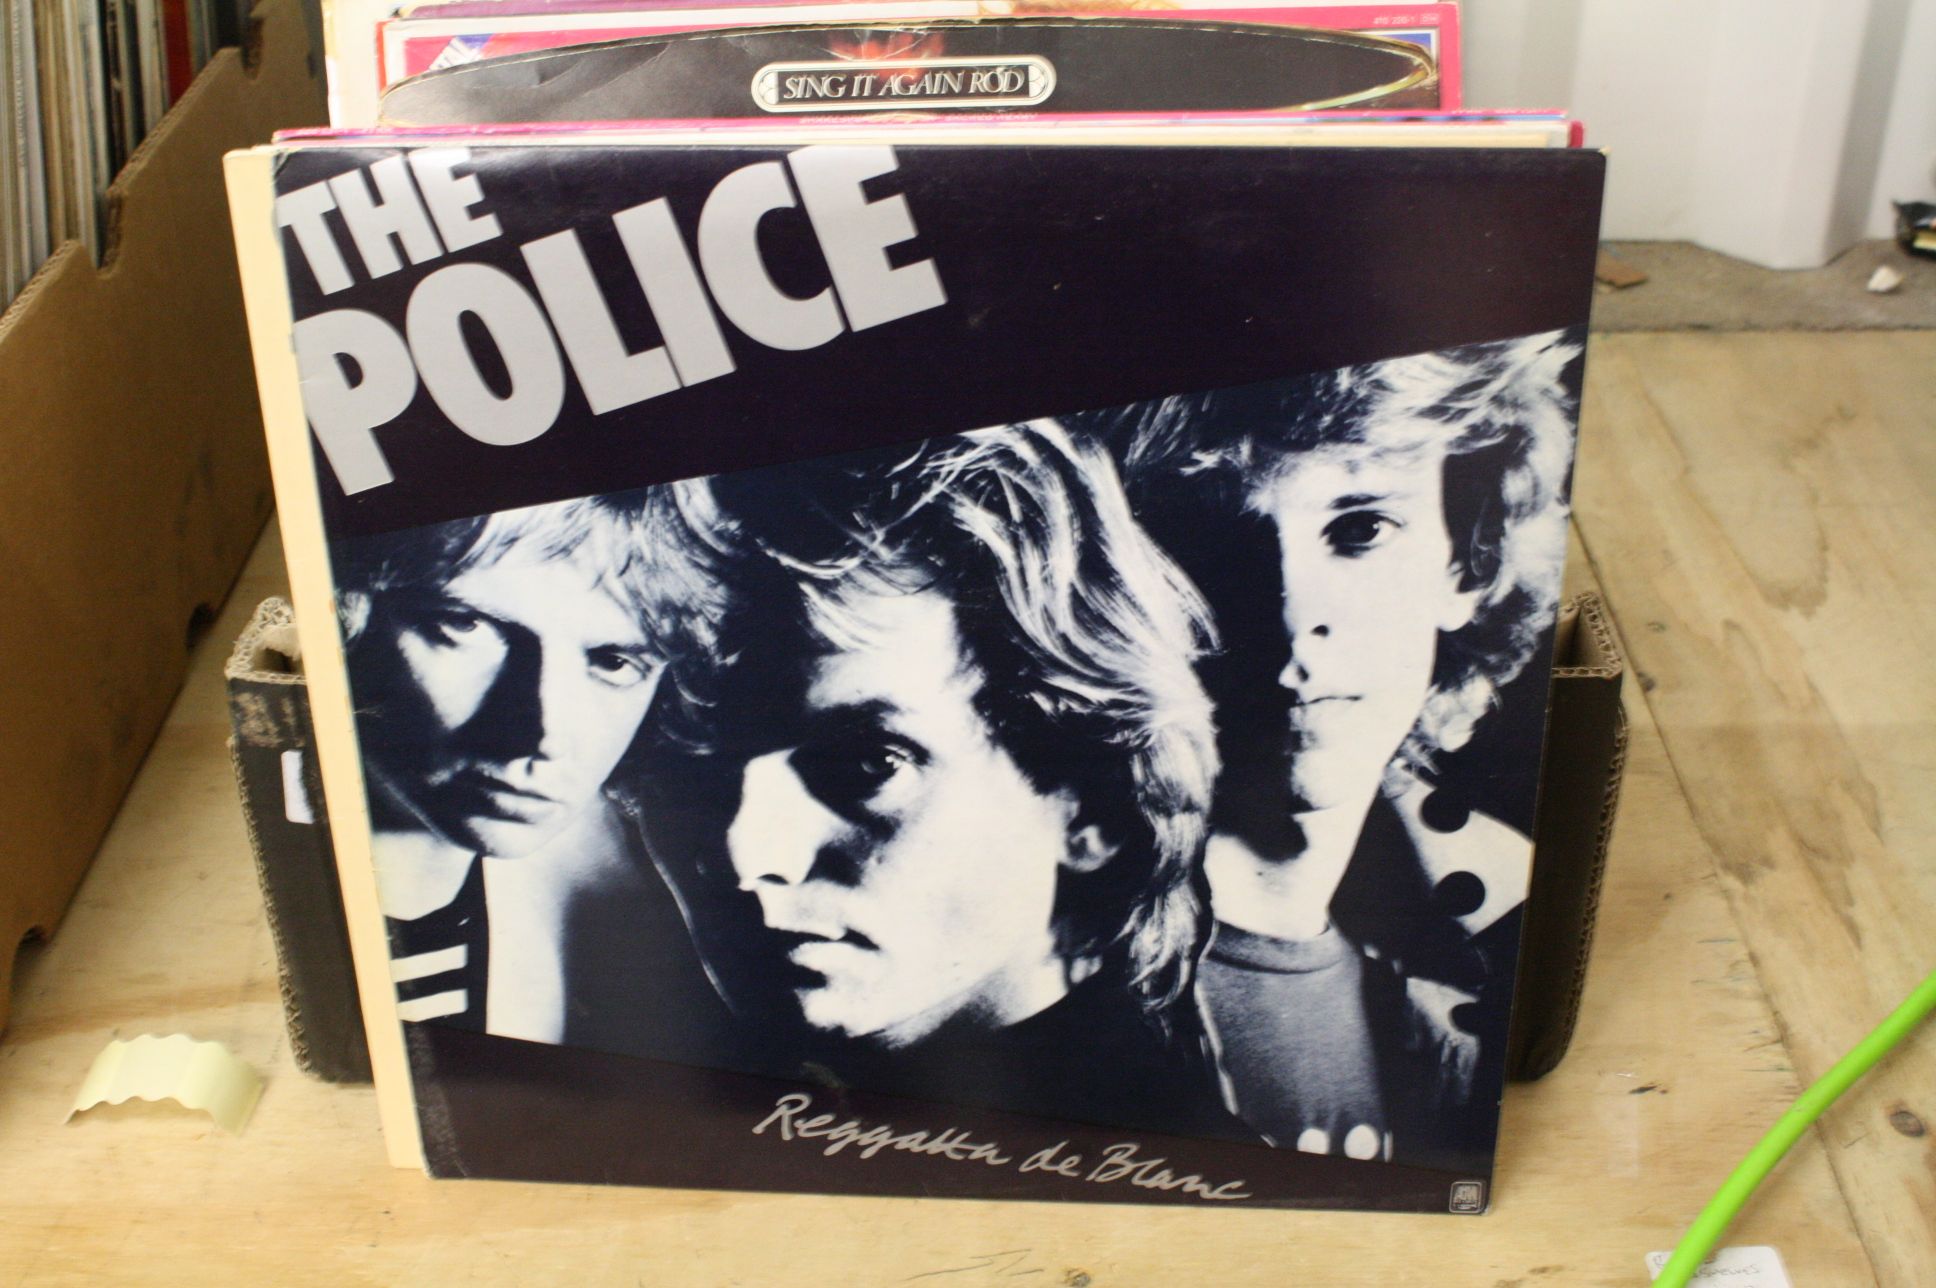 Vinyl - Collection of approx 100 rock & pop LP's to include The Police, The Eagles, Eric Clapton, - Image 6 of 6